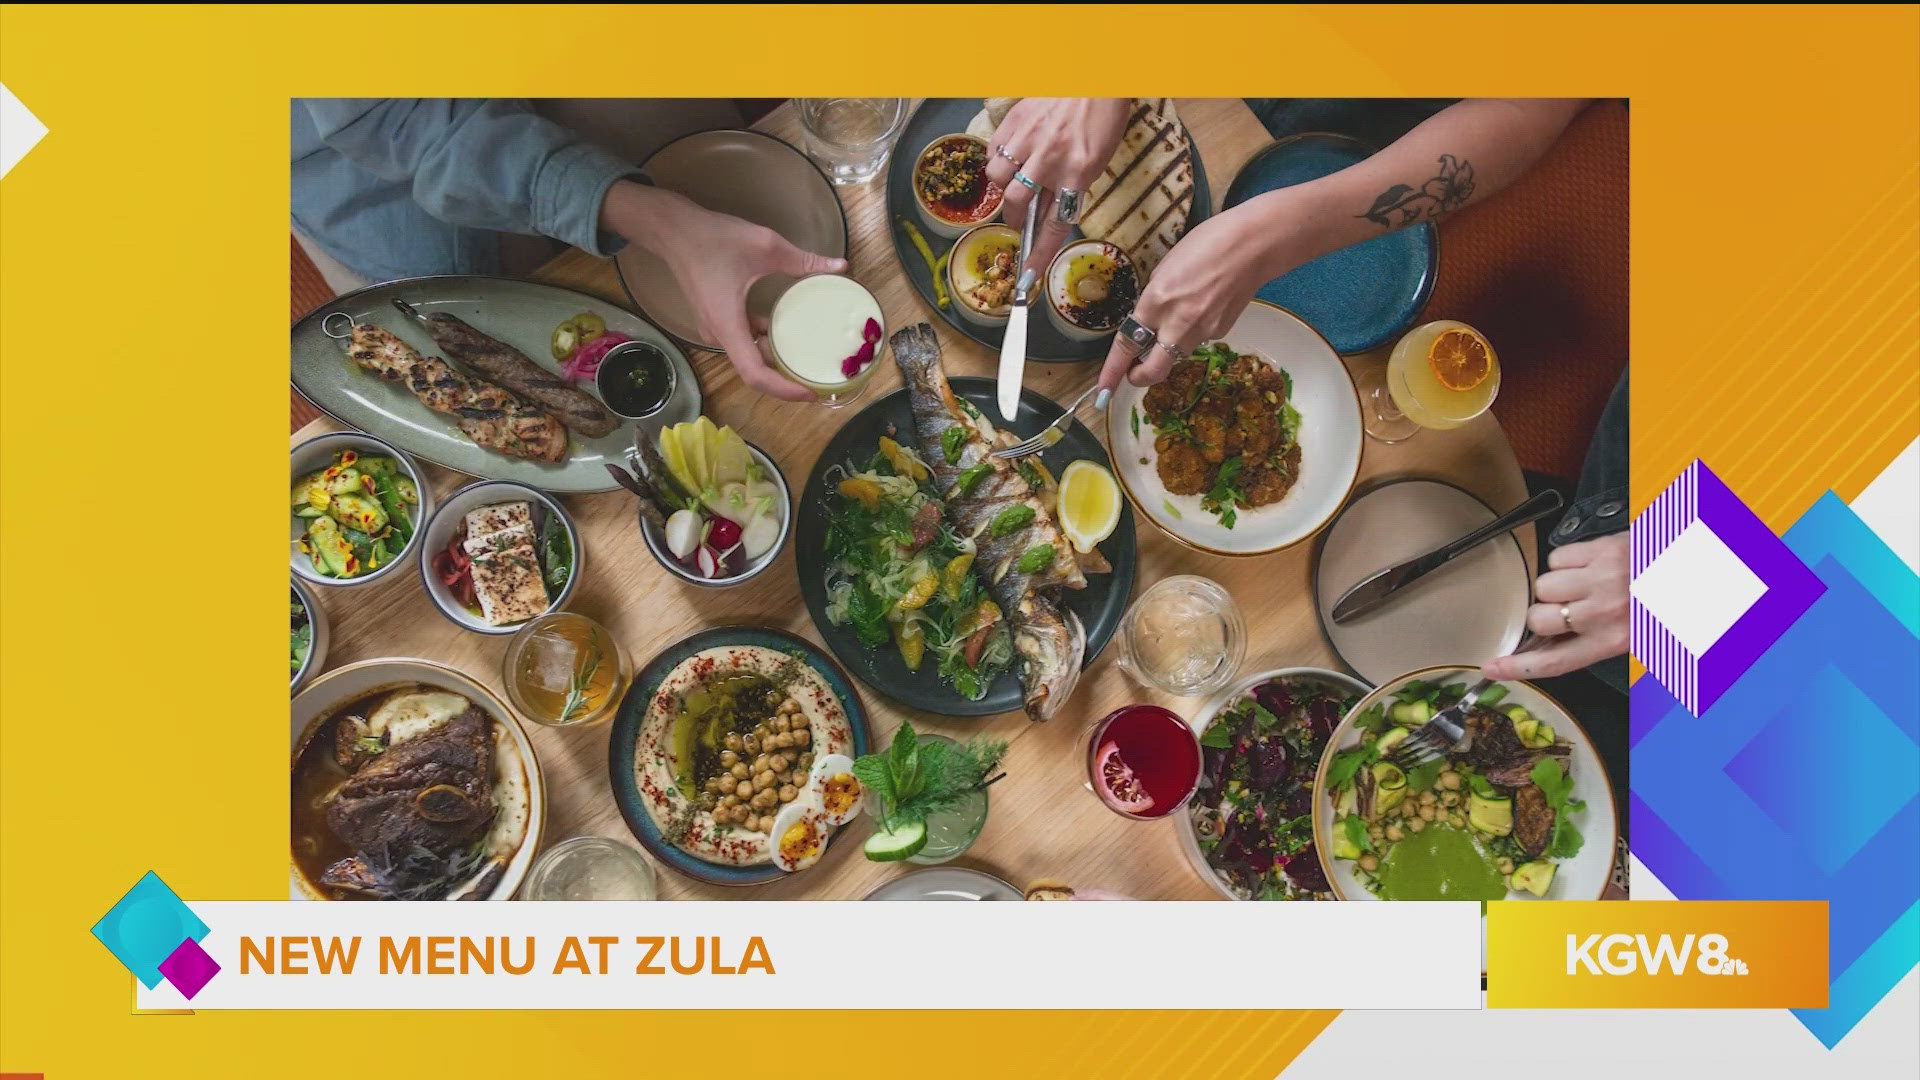 Zula, a family-owned Mediterranean restaurant, is celebrating its first anniversary